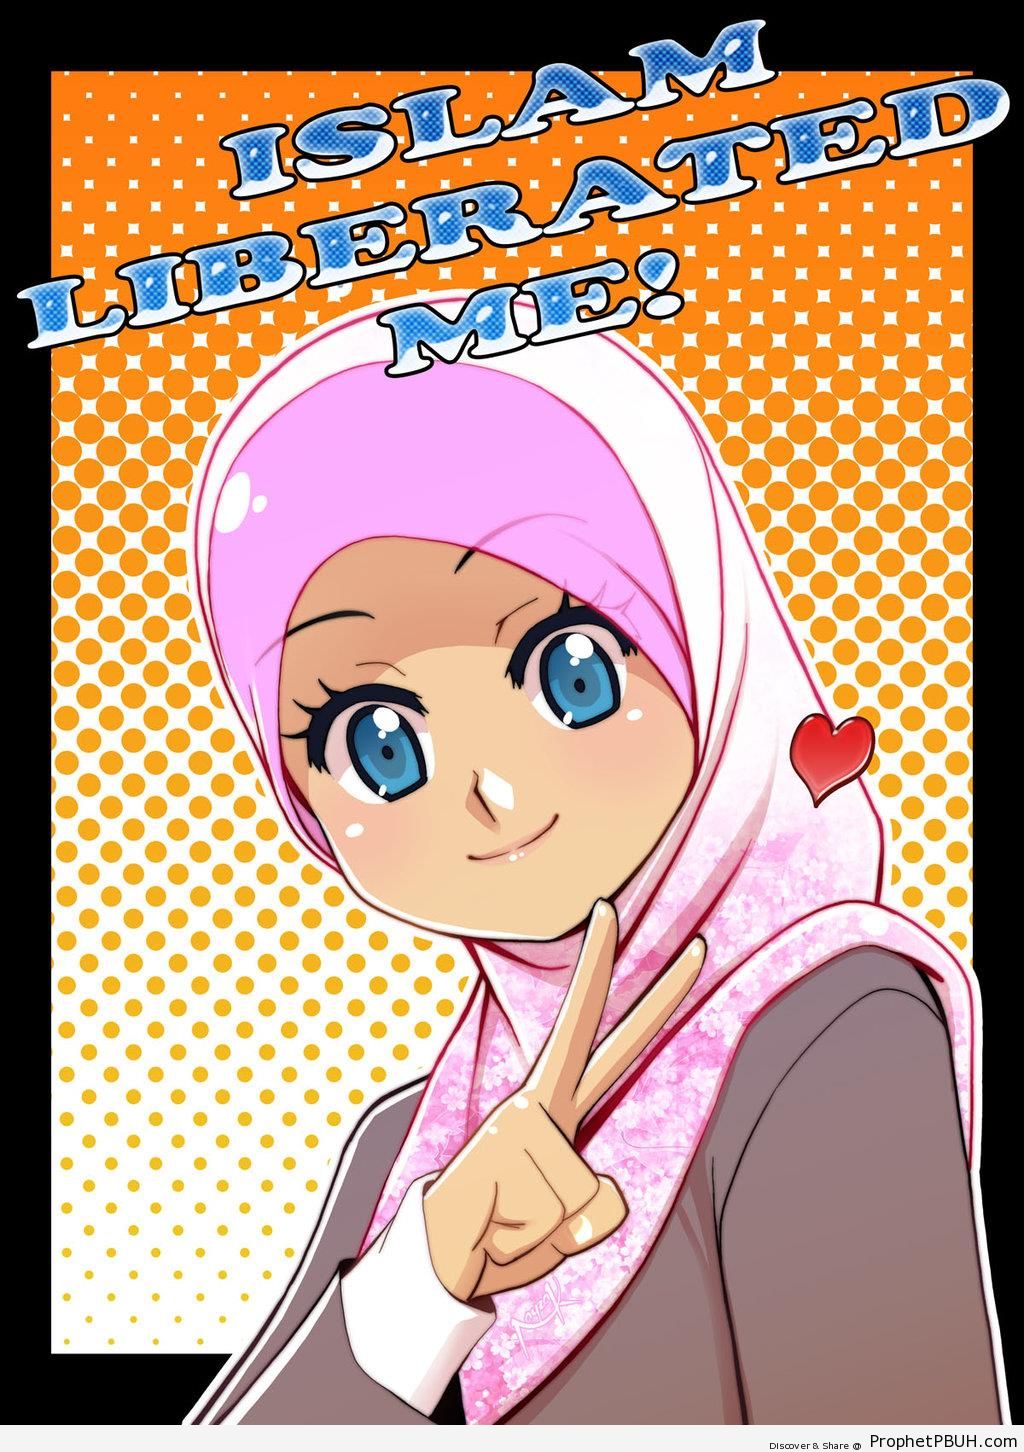 Islam Liberated Me (Poster With Smiling Anime Hijabi) - Drawings 